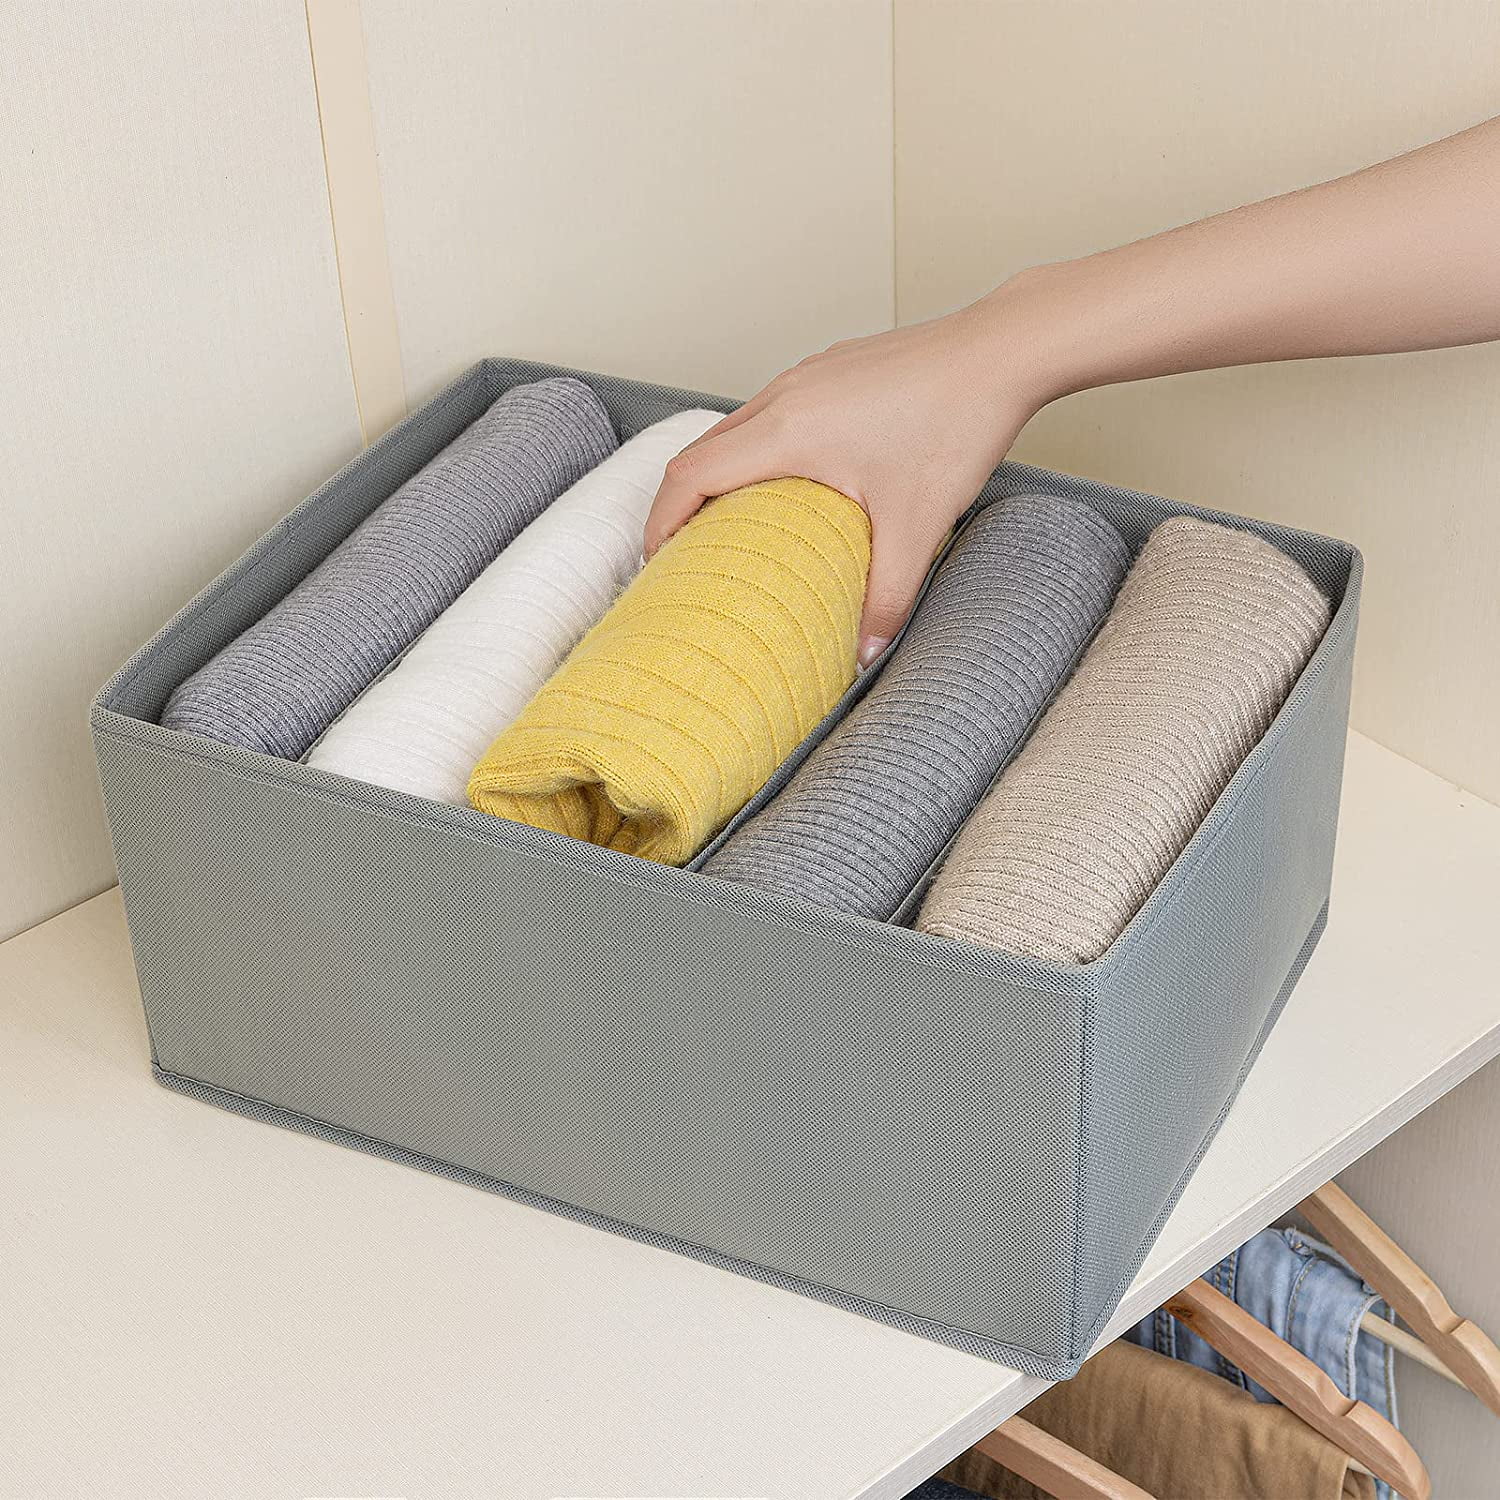 DIMJ Drawer Organizer for Clothes, Storage Bin for Jeans